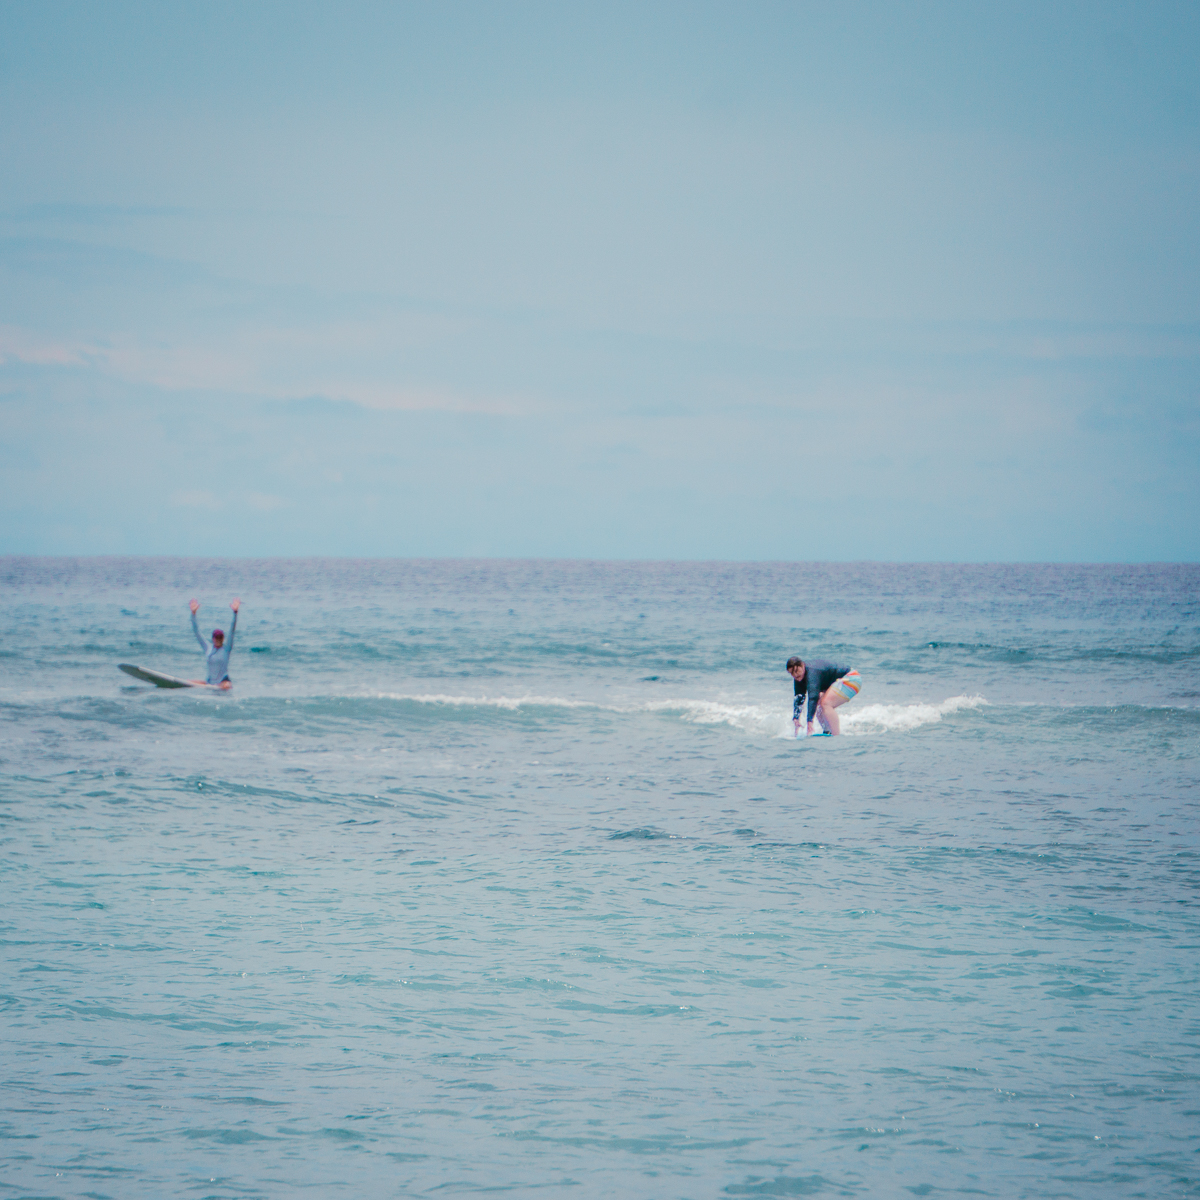 Woman standing on surfboard during Maui Surfer Girls lesson